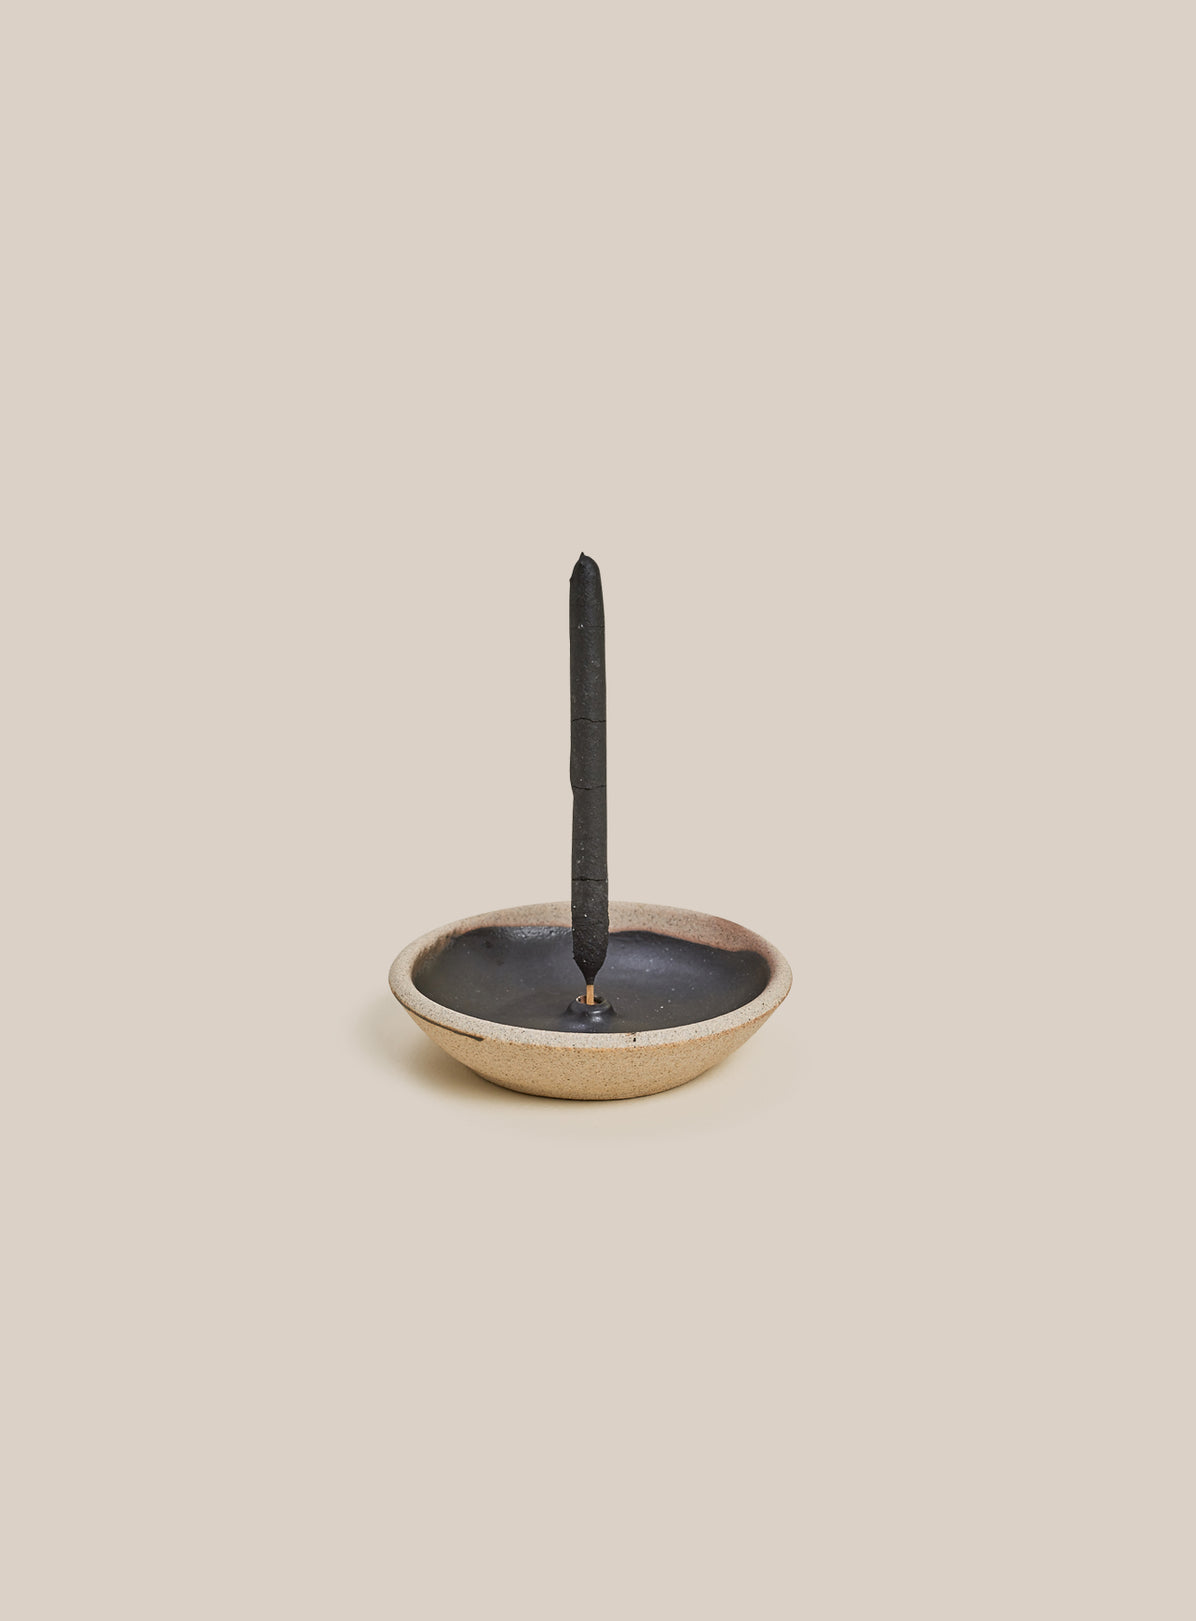 Black Woodfired Incense Holder By Incausa